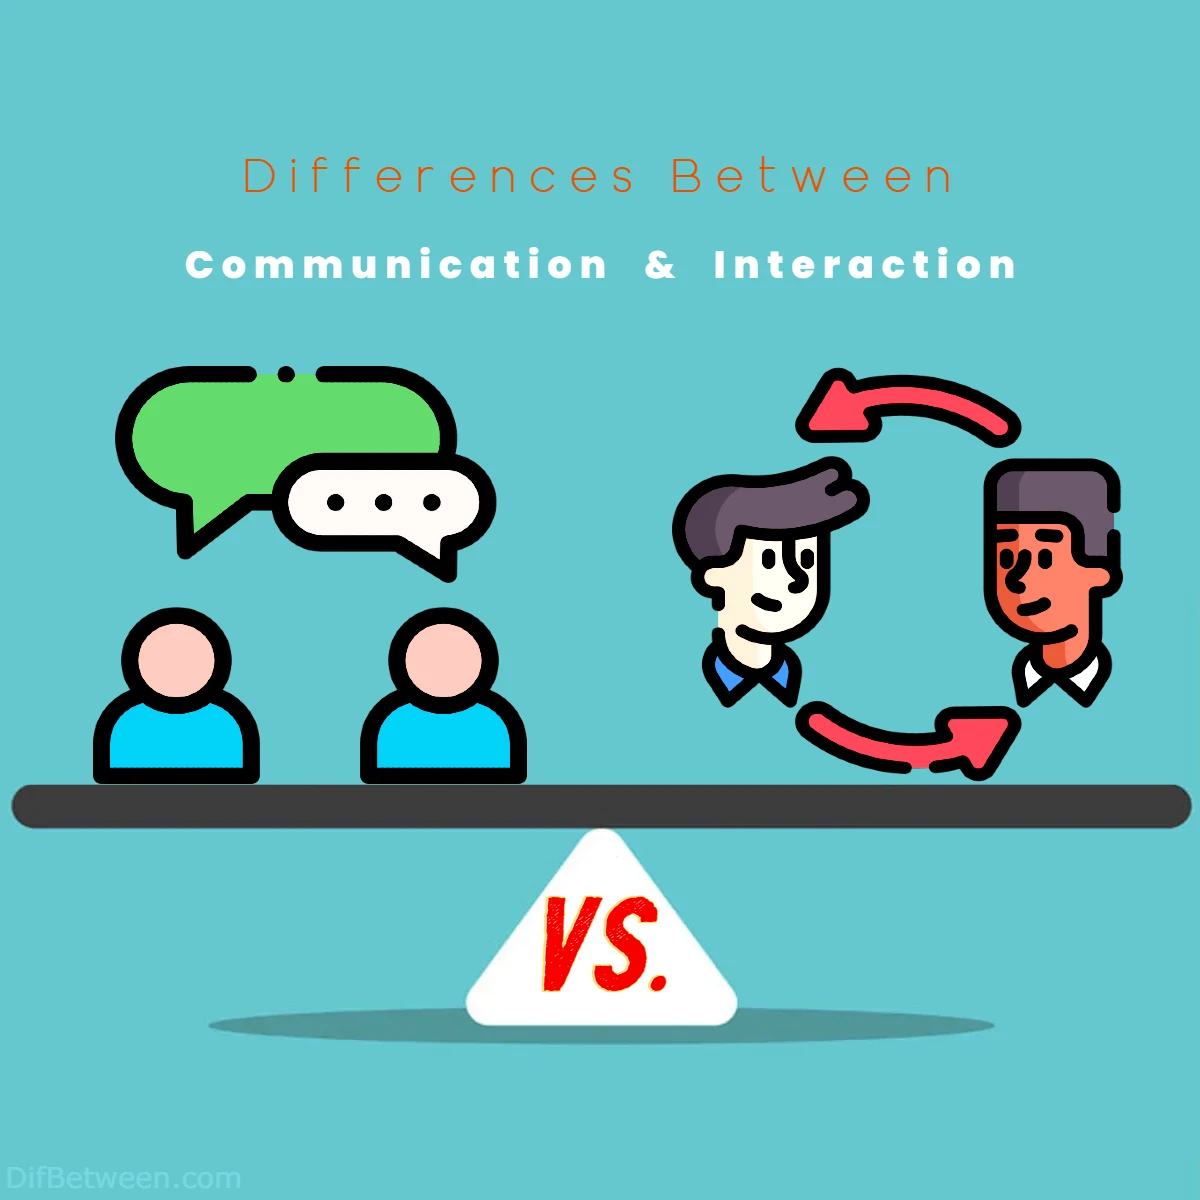 Differences Between Communication vs Interaction